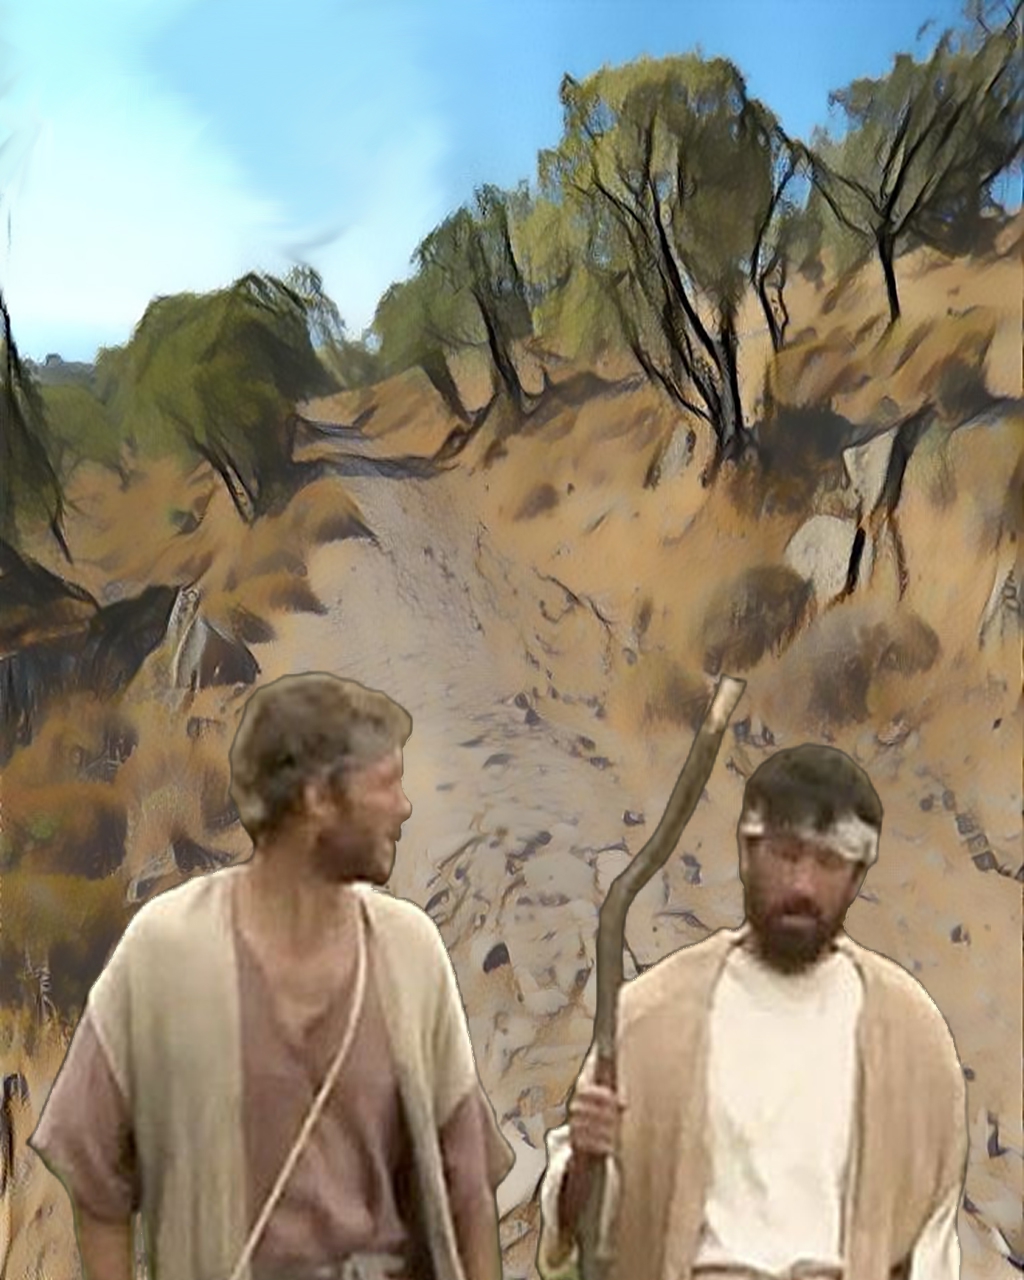 The two disciples walking towards us on the road to Emmaus.